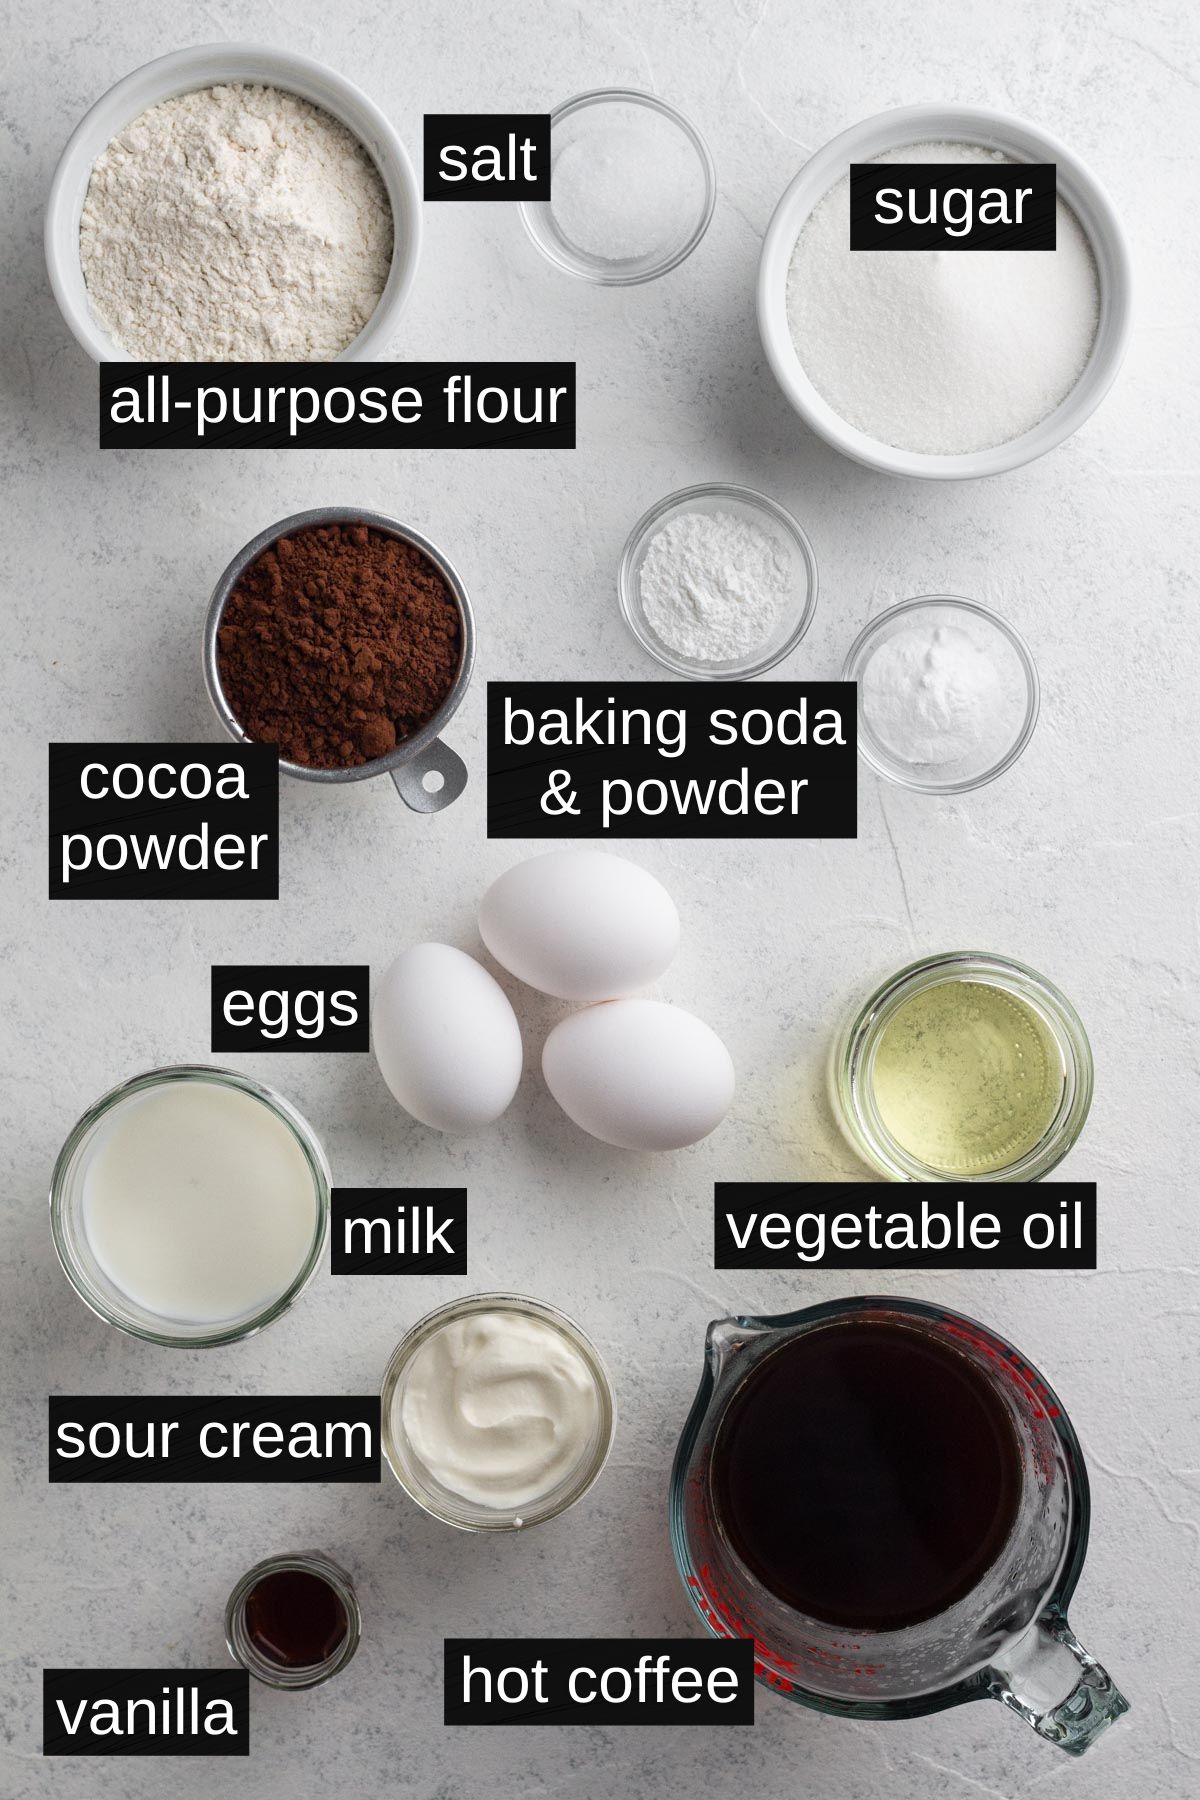 Cake ingredients with labels on a white background.